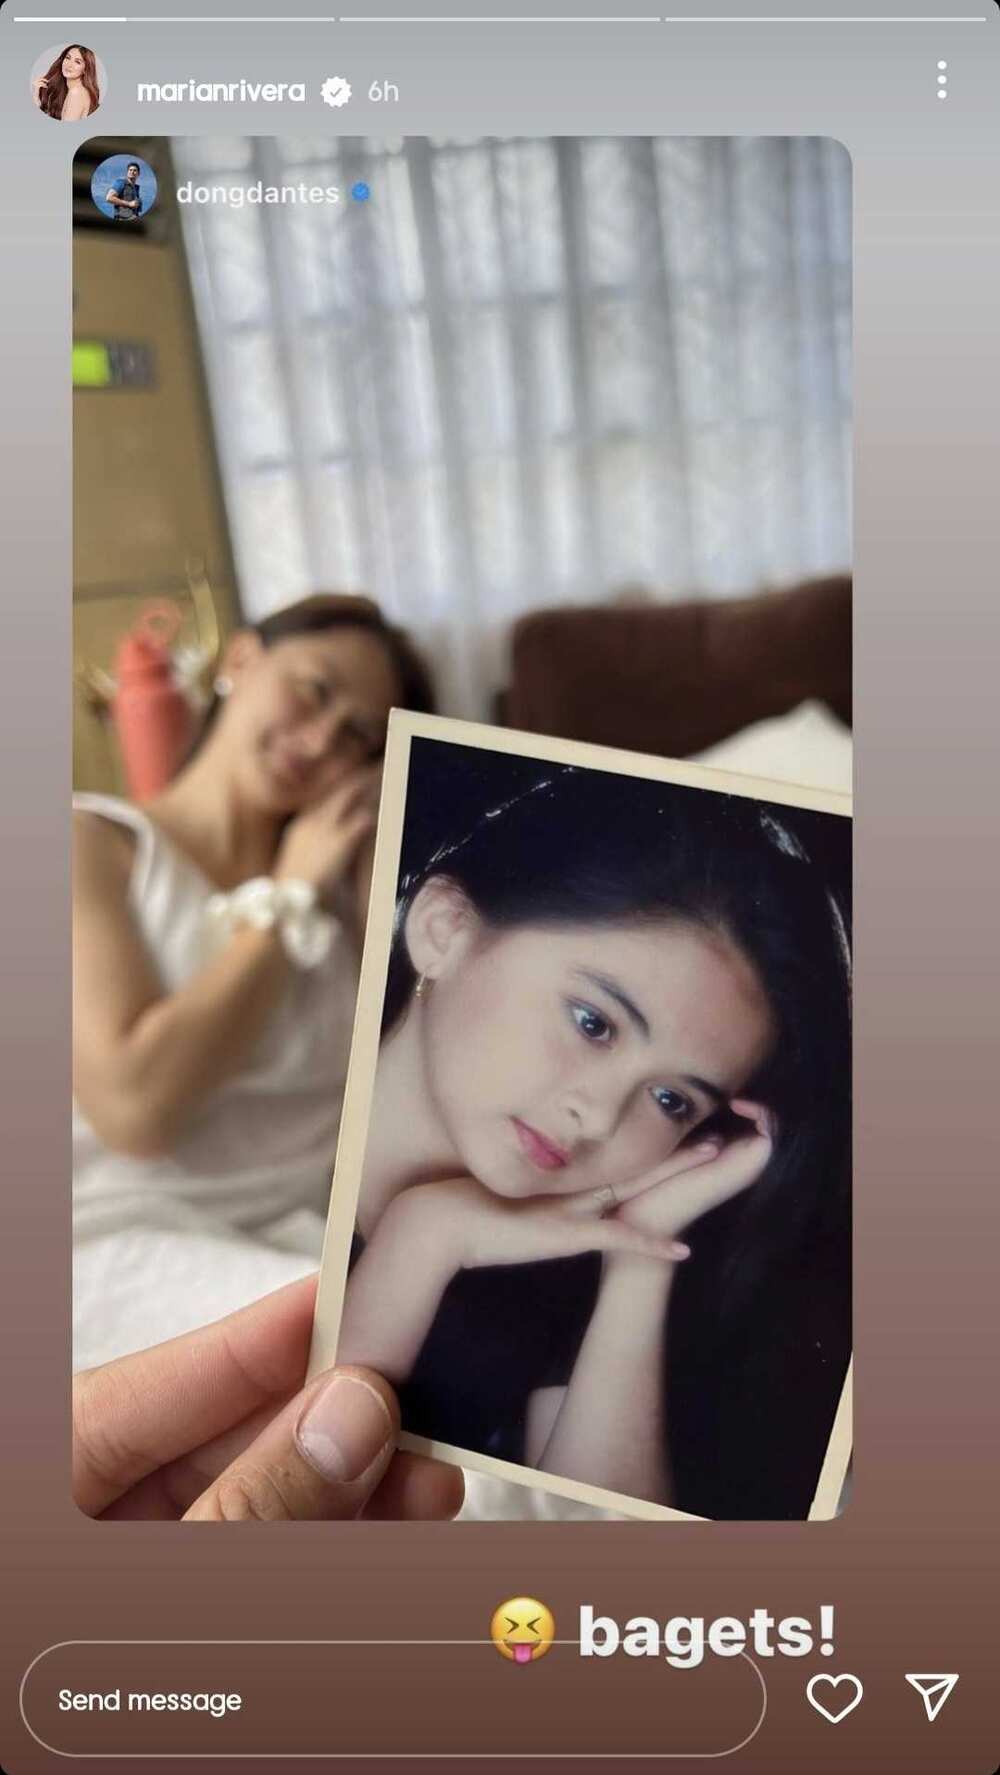 Marian Rivera recreates stunning old picture of herself: "Bagets!"